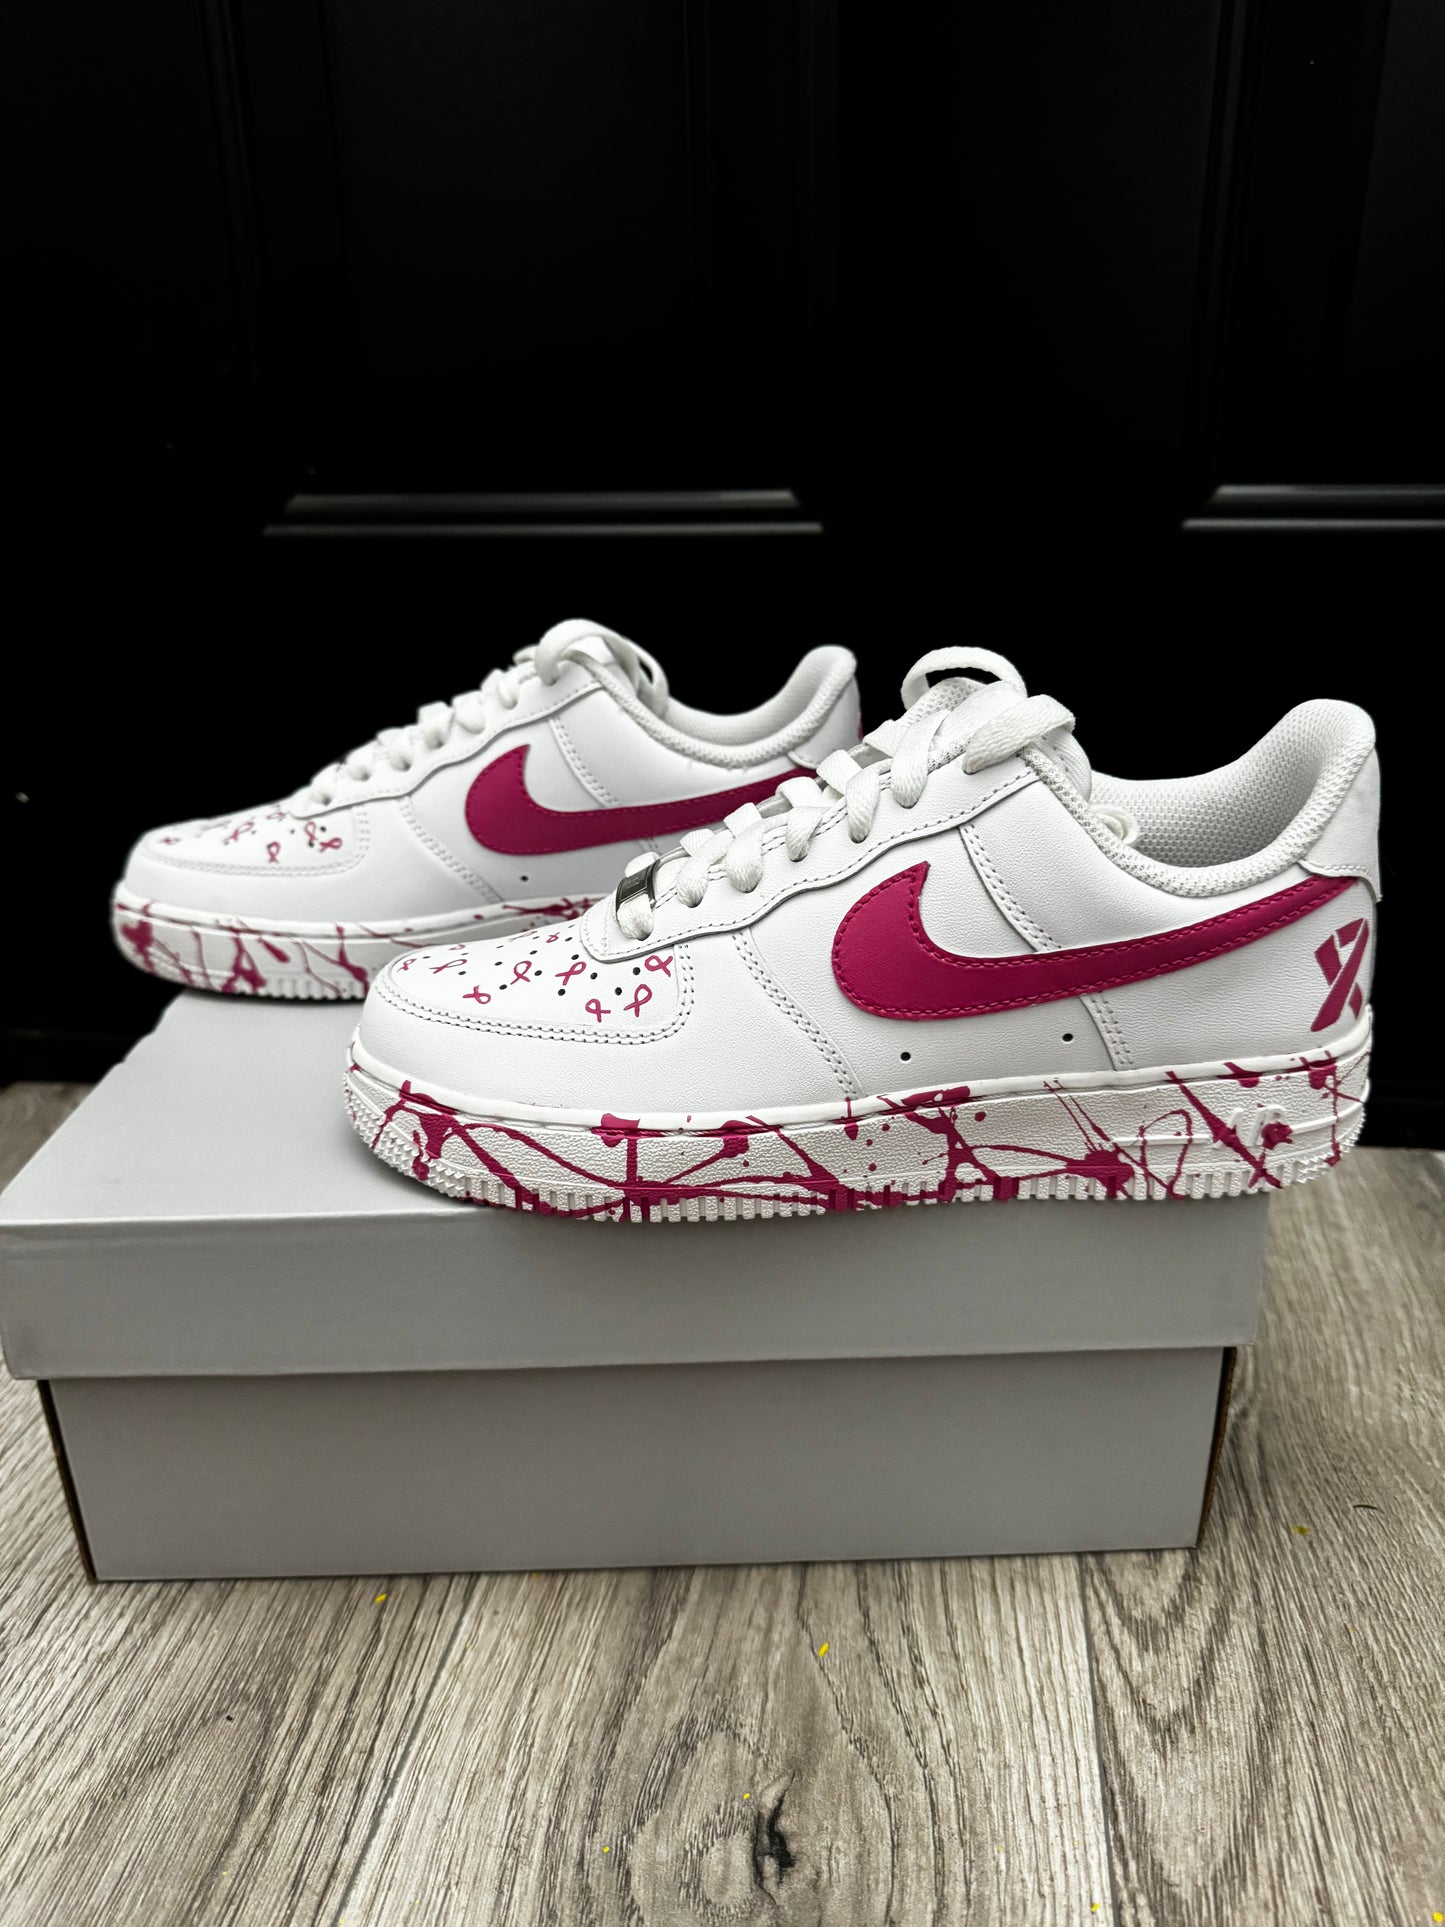 Cancer Awareness Air Forces